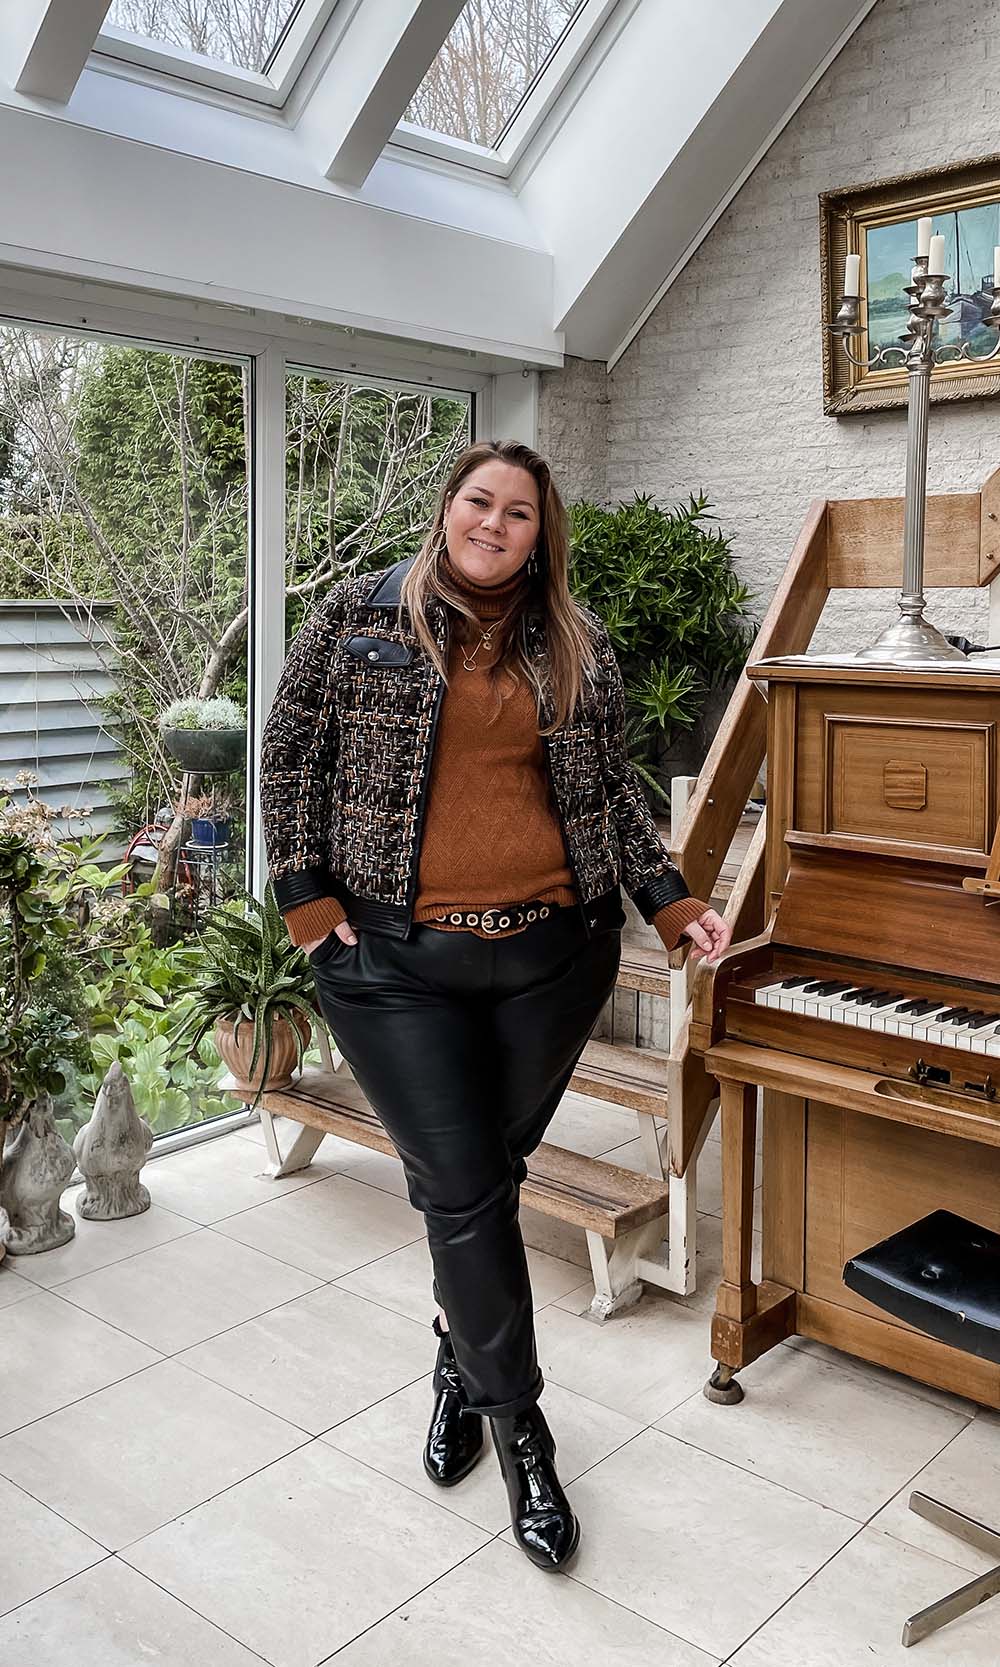 Josine Wille, plussize fashion blog, body positive blogger, happy size, grote maten mode, maat 48, maat 50, thebiggerblog, webshop grote maten, nepleren broek, faux leather pants, boucle jas, boucle blazer, nep leder, vegan leer, vegan leather, paprika fashion, lakschoenen, 2021, fashion outfit, outfit inspiration, fashion is fun, shop your shape